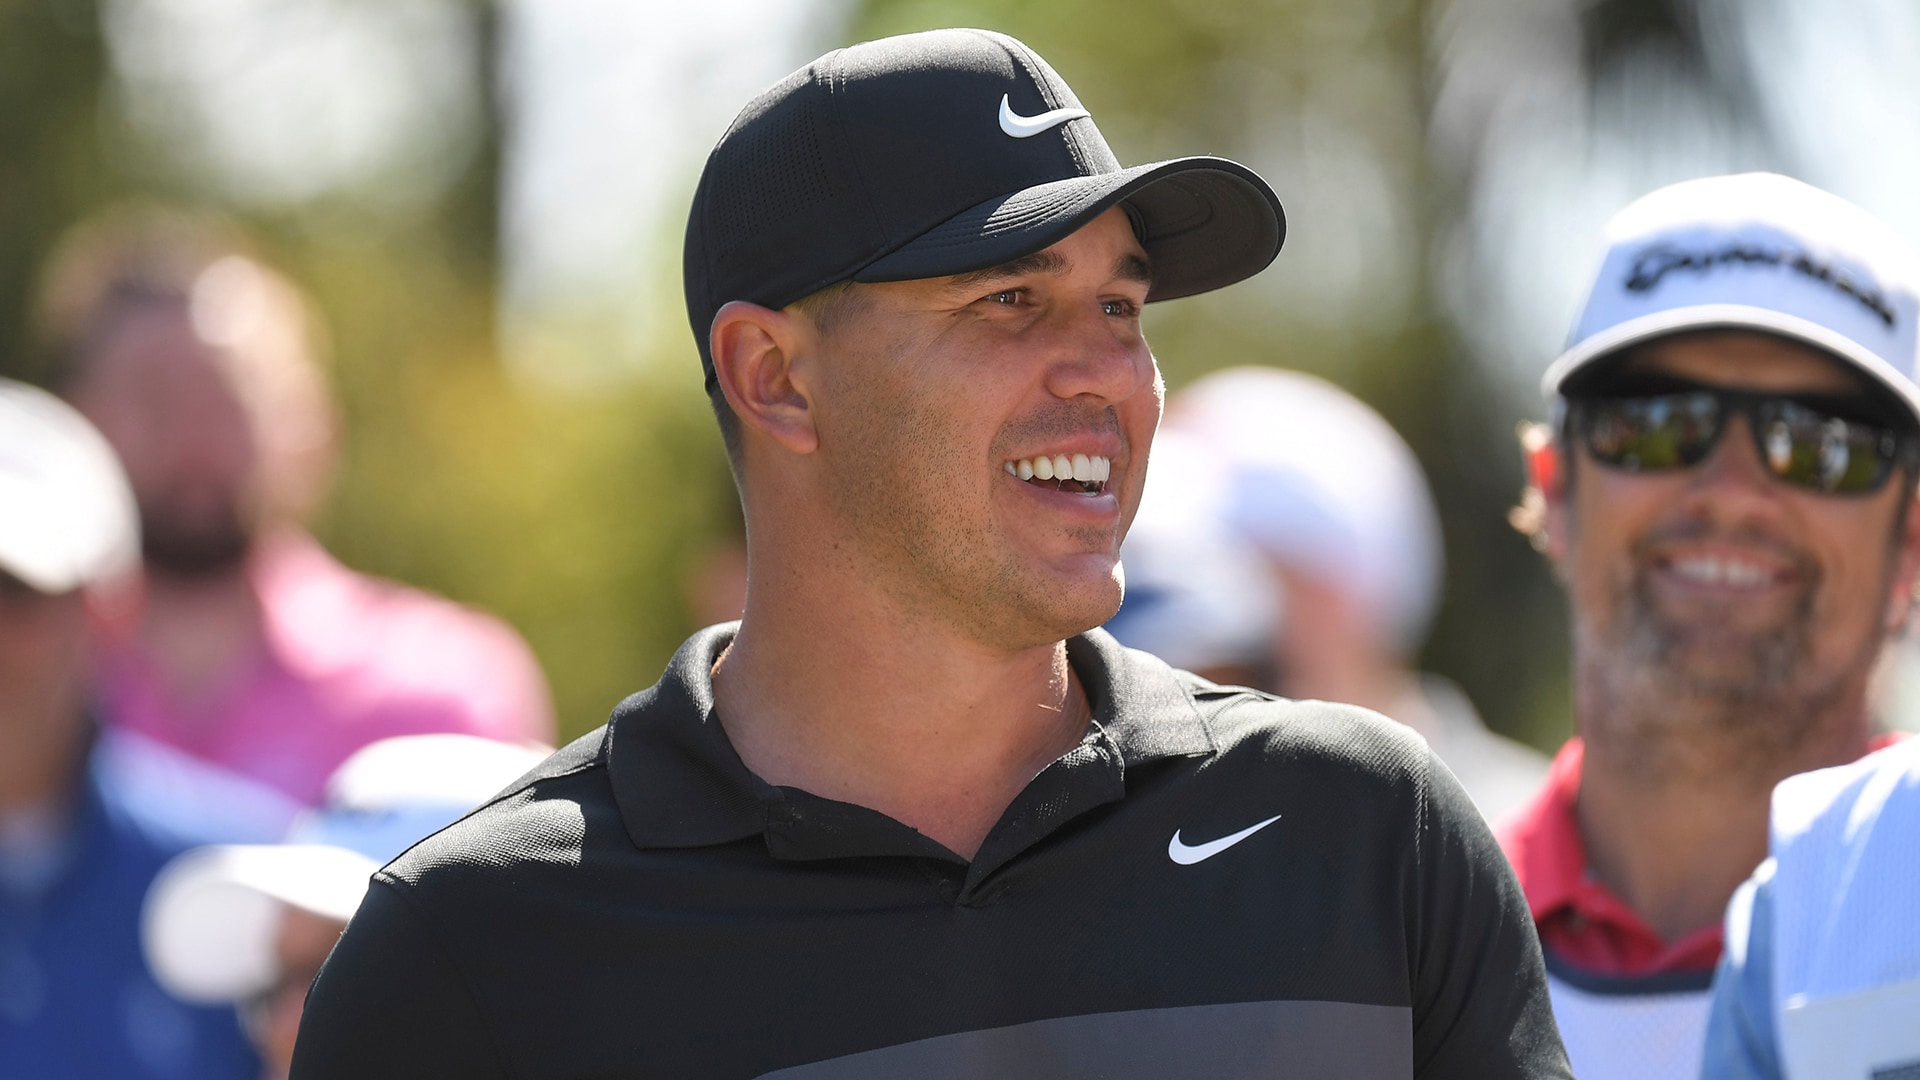 Hear which Tour pro Brooks Koepka thinks would struggle carrying his own bag